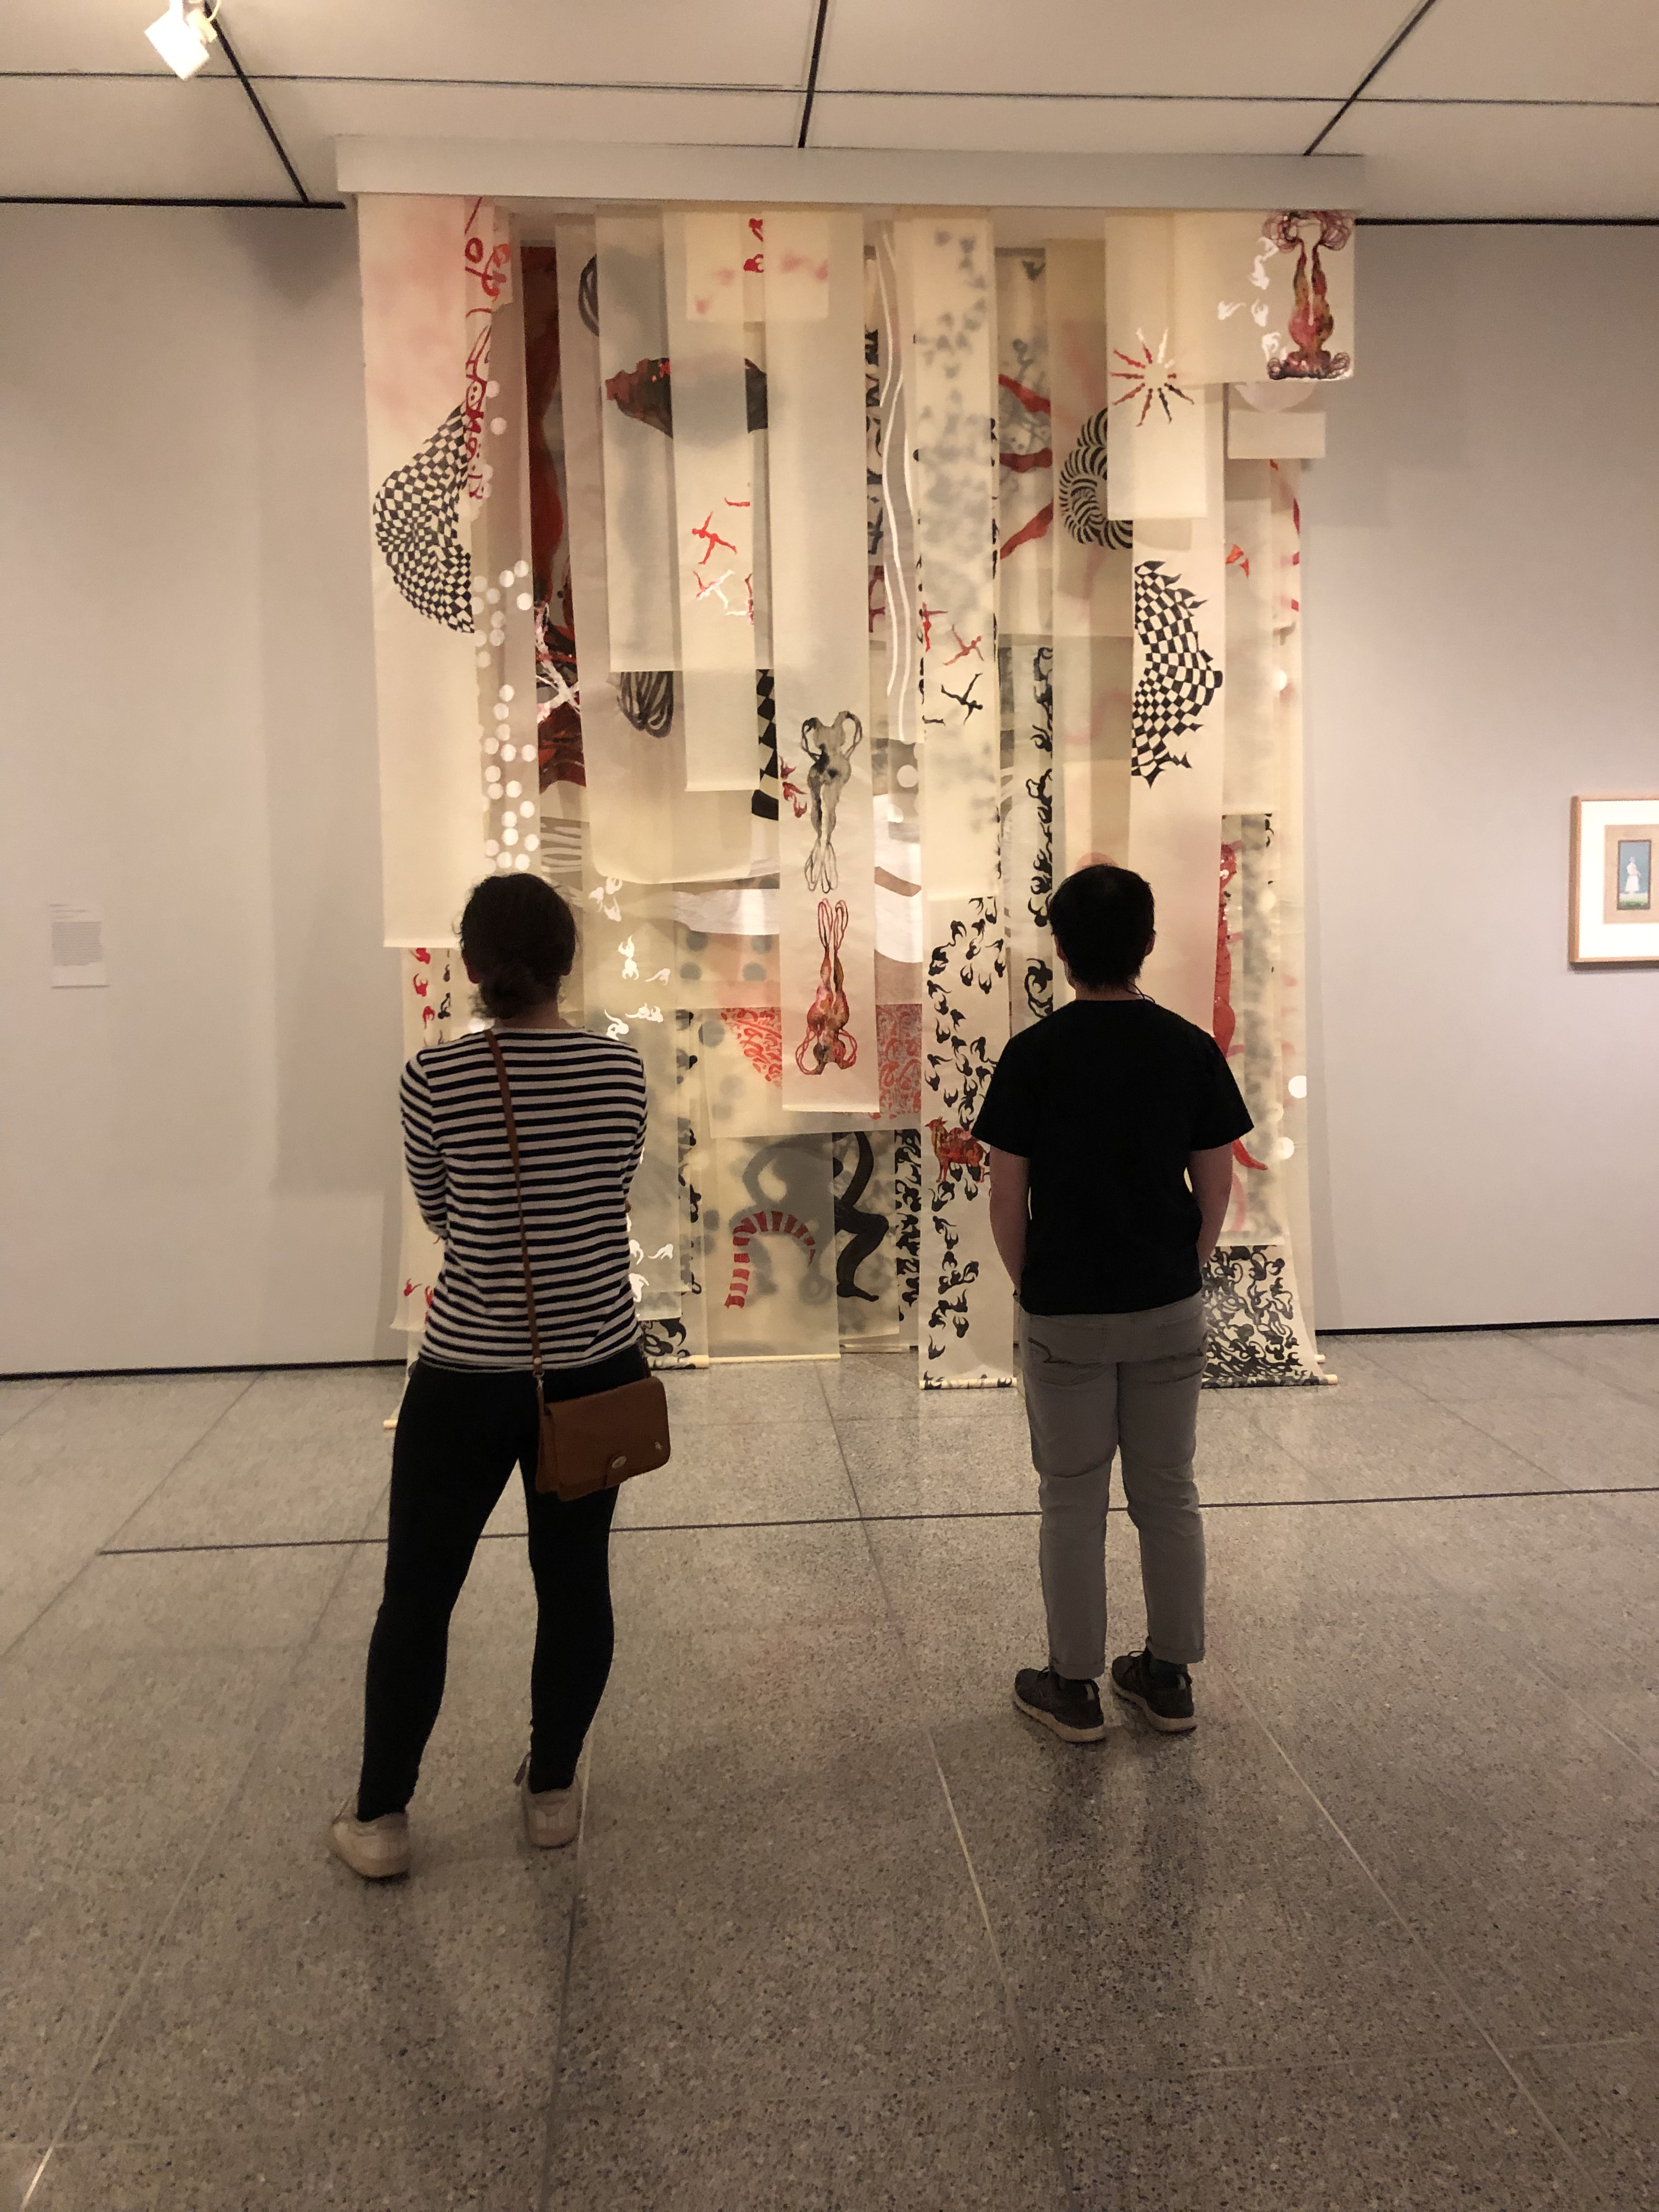 Two people examining an art piece made of white strips with black and red patterns and hanging from the ceiling